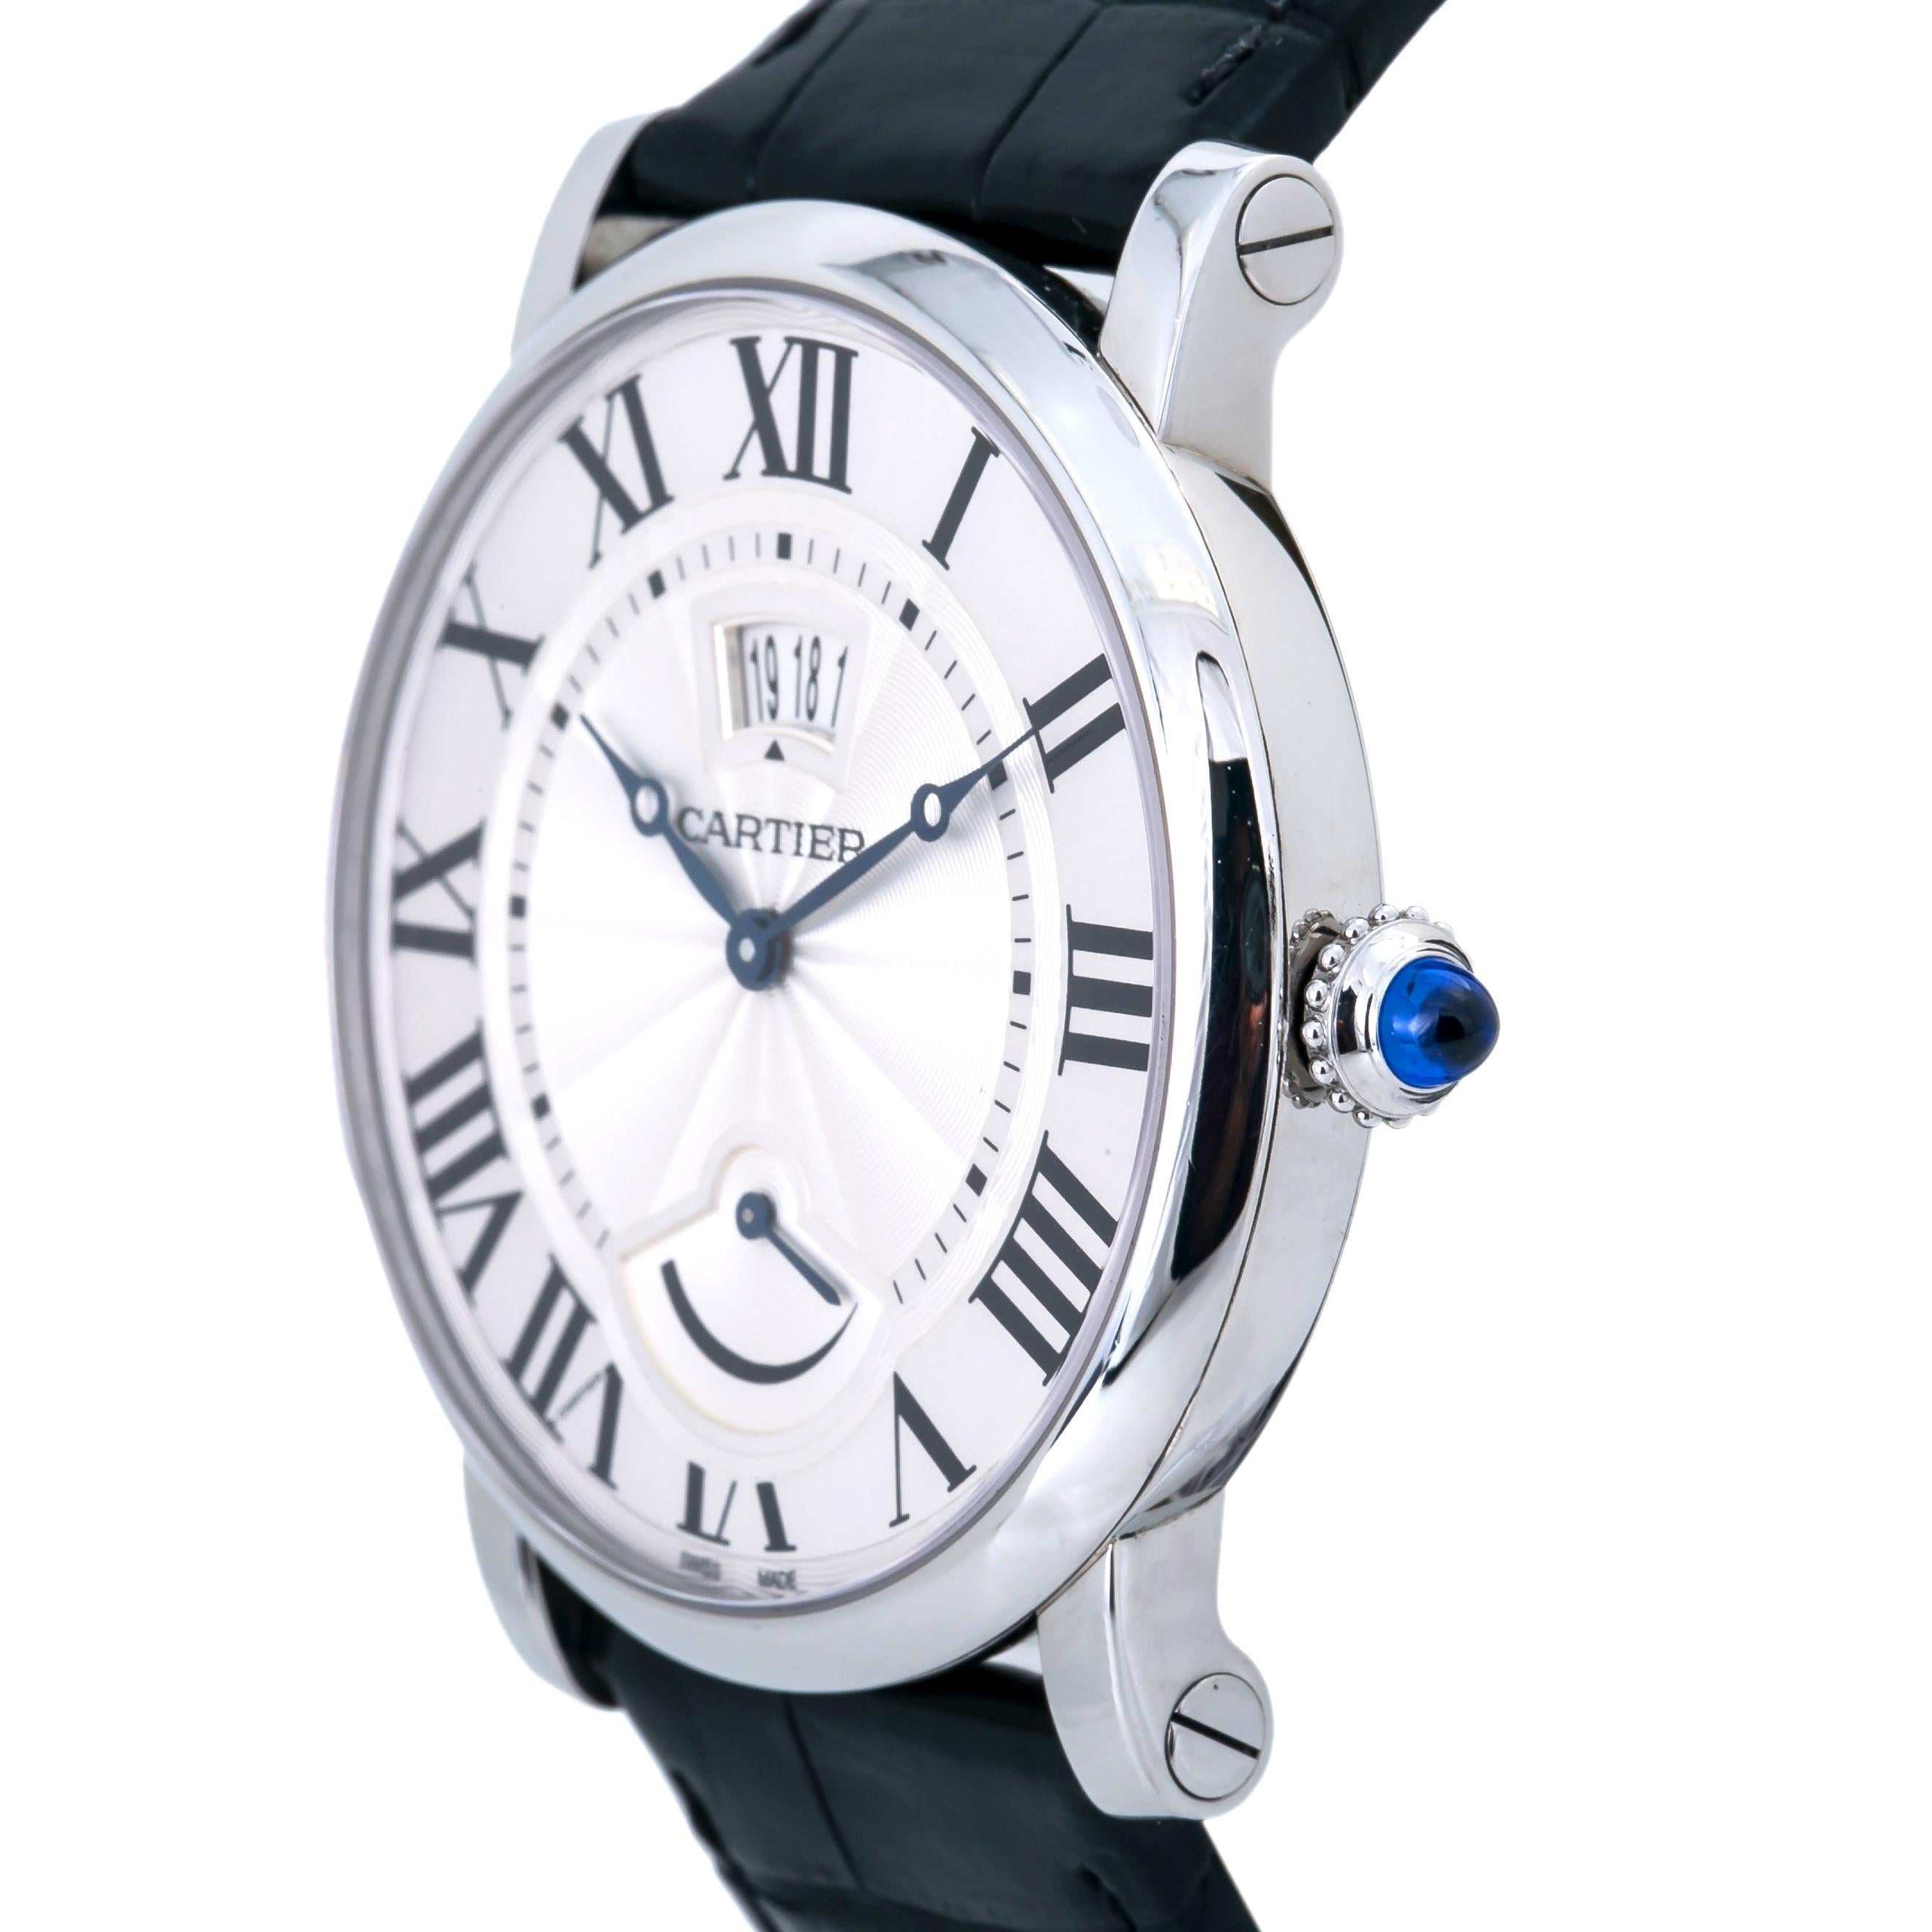 Contemporary Cartier Rotonde W1556369 Manual Wind Stainless Leather Men's Watch